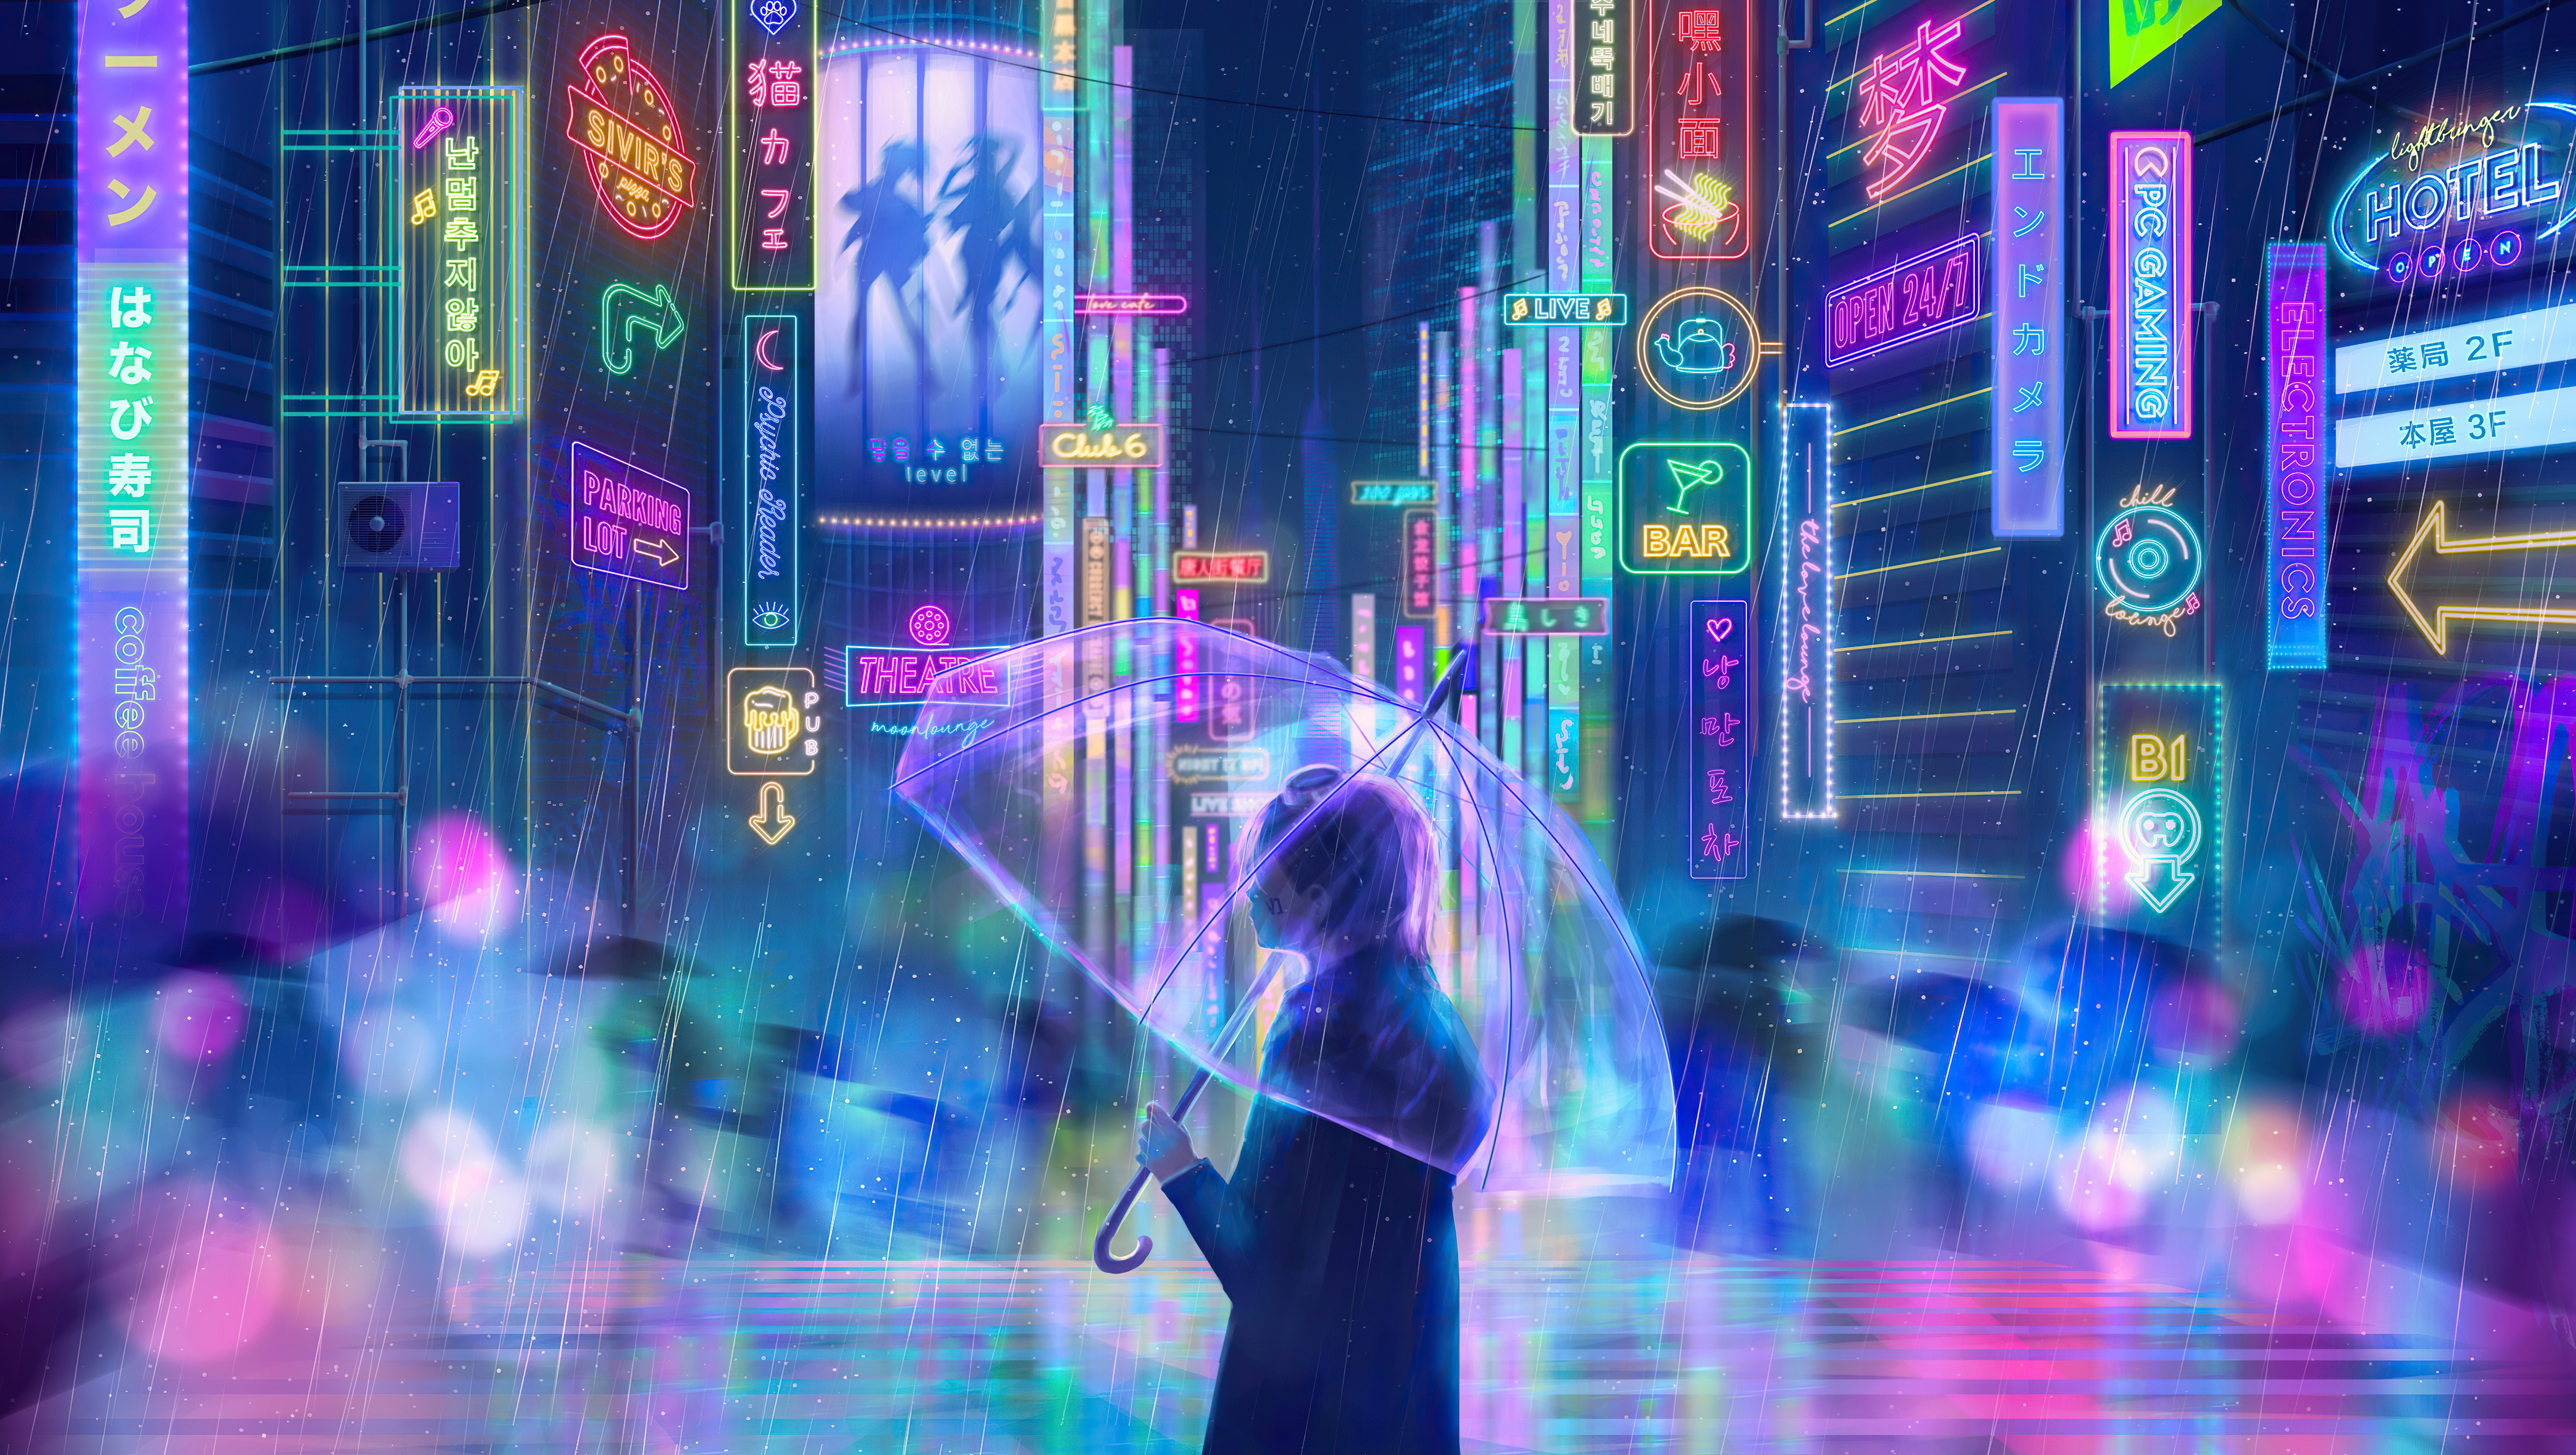 Anime boy neon wallpaper by Crooco  Download on ZEDGE  e29d